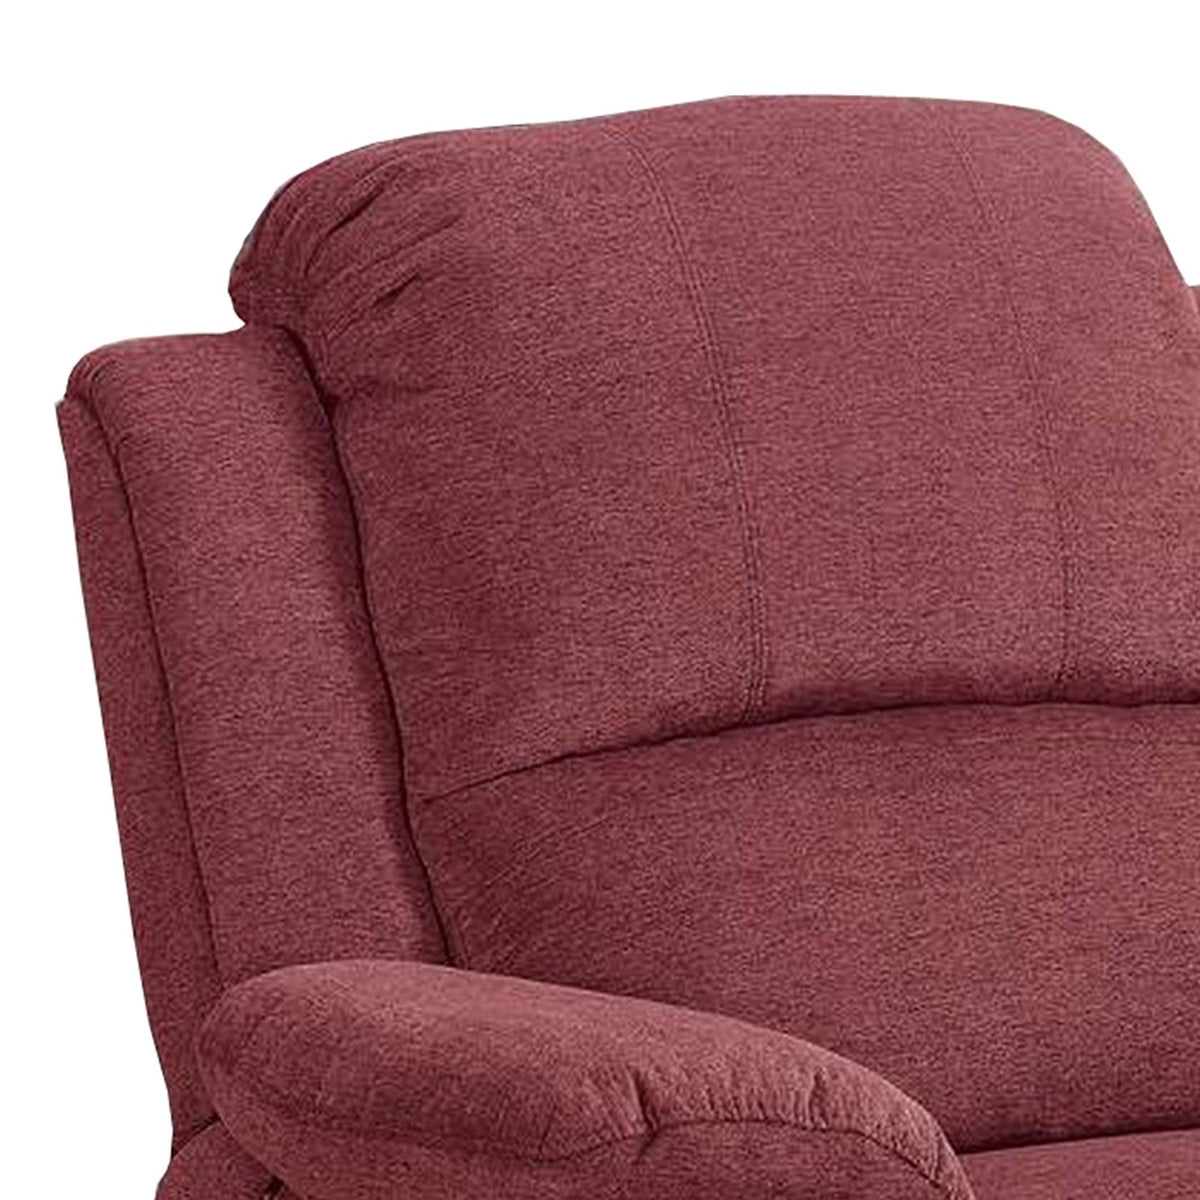 39 Inch Fabric Power Recliner with USB Port, Red - BM232060